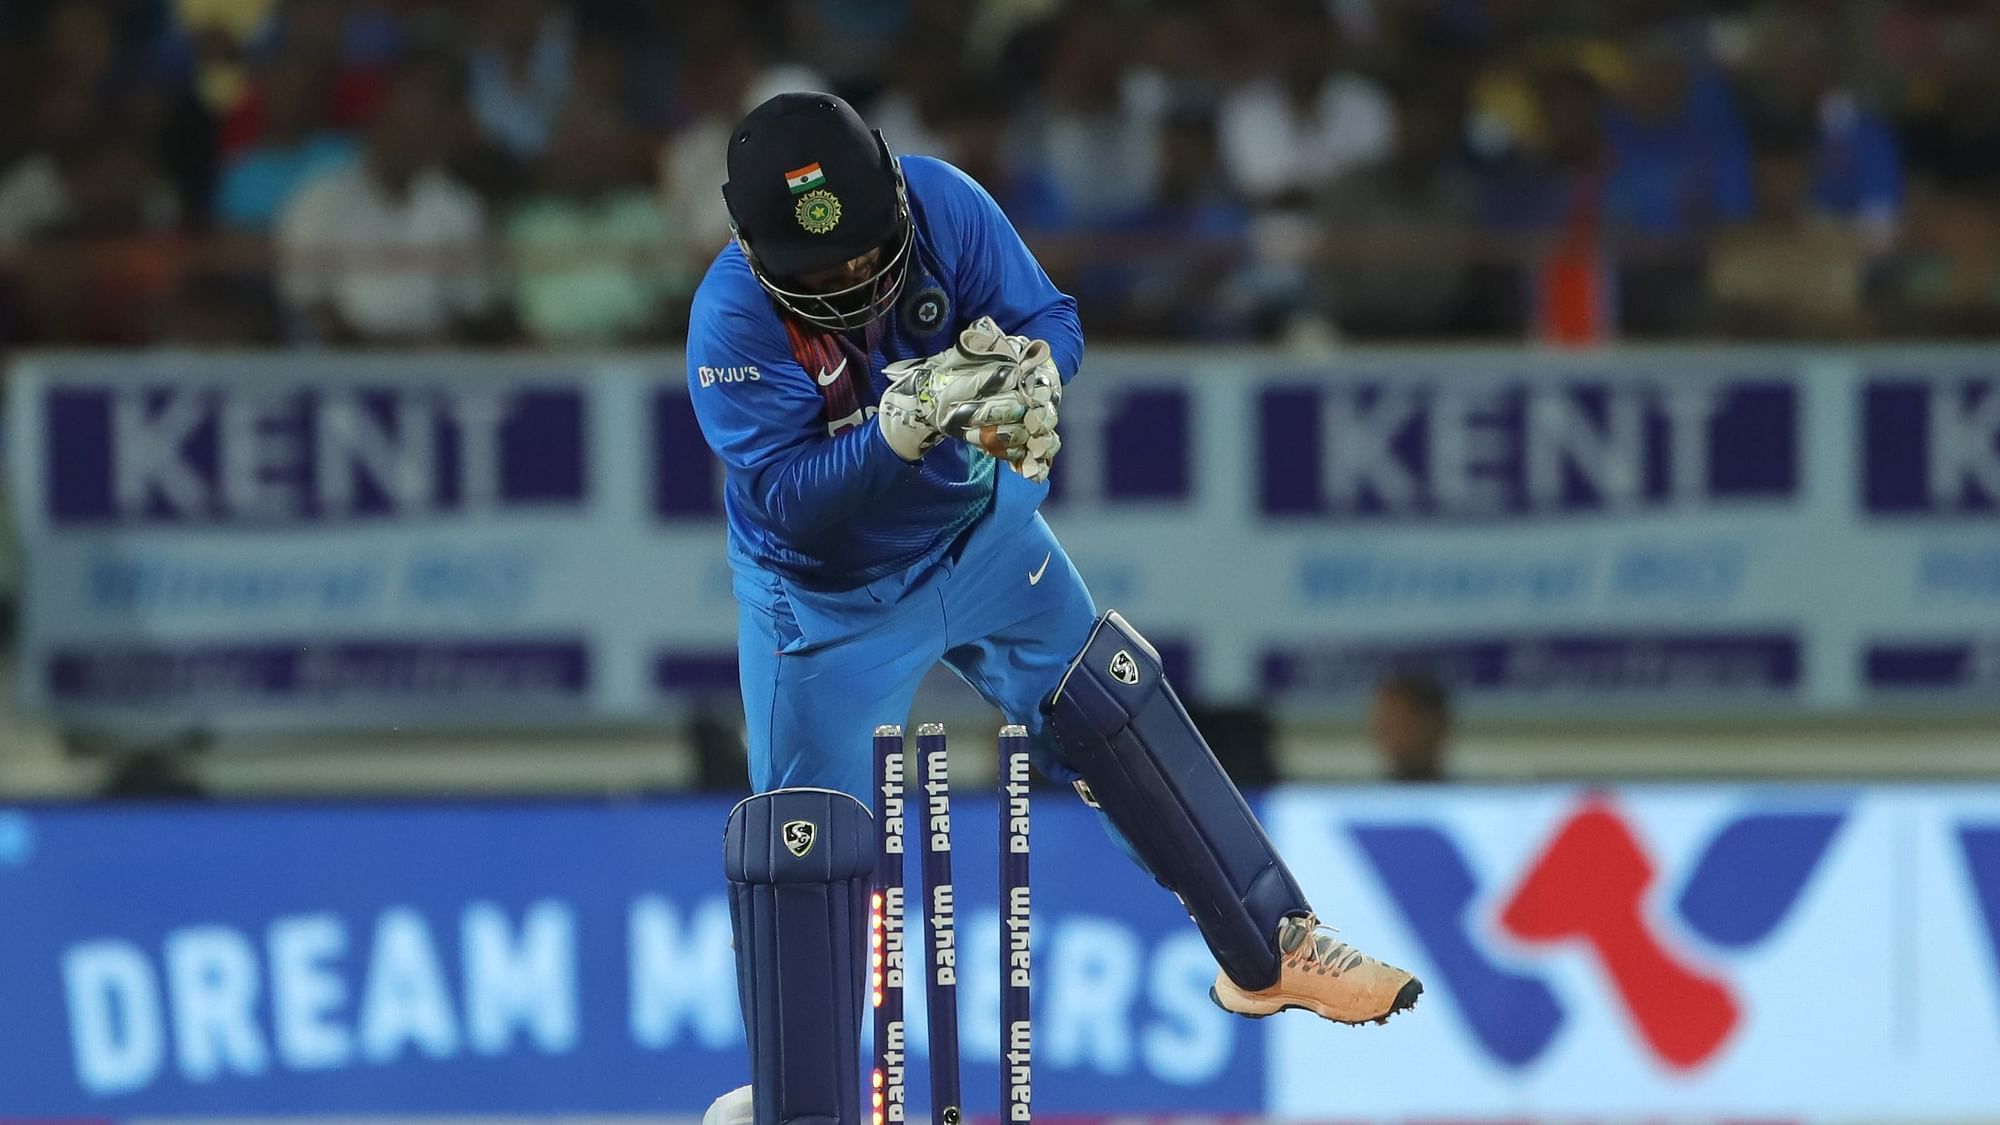 Rishabh Pant’s wicket-keeping mistake cost India Liton Das’ wicket in the Rajkot T20.